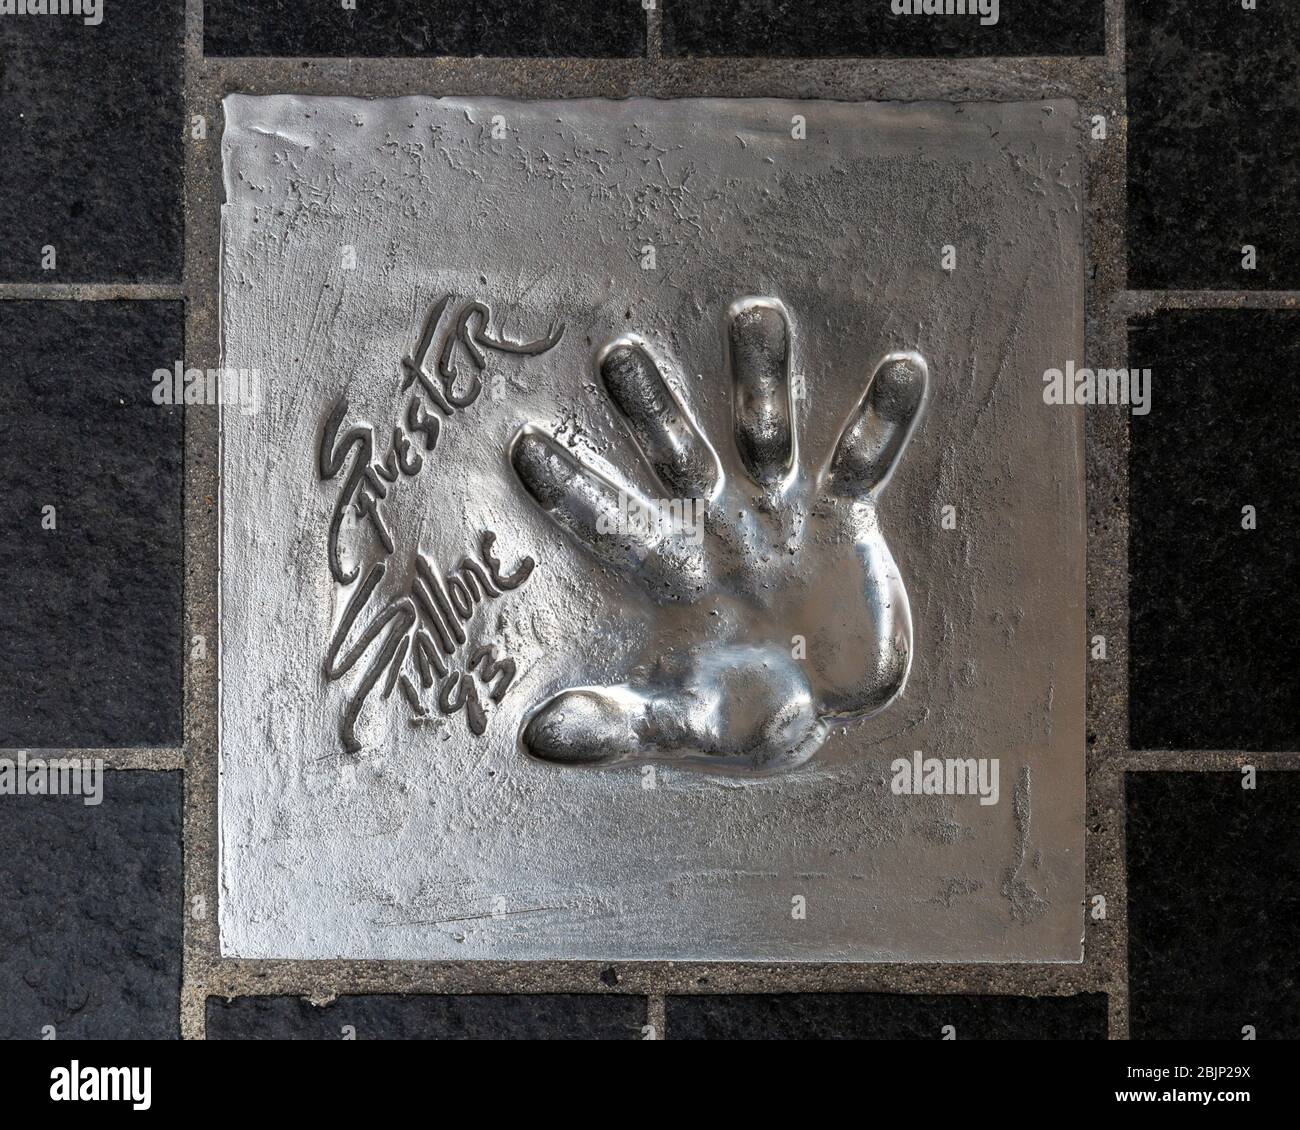 Sylvester Stallone's Handprint, Cannes Walk of Fame, Cote d'Azur, Provence, Frankreich. Stockfoto